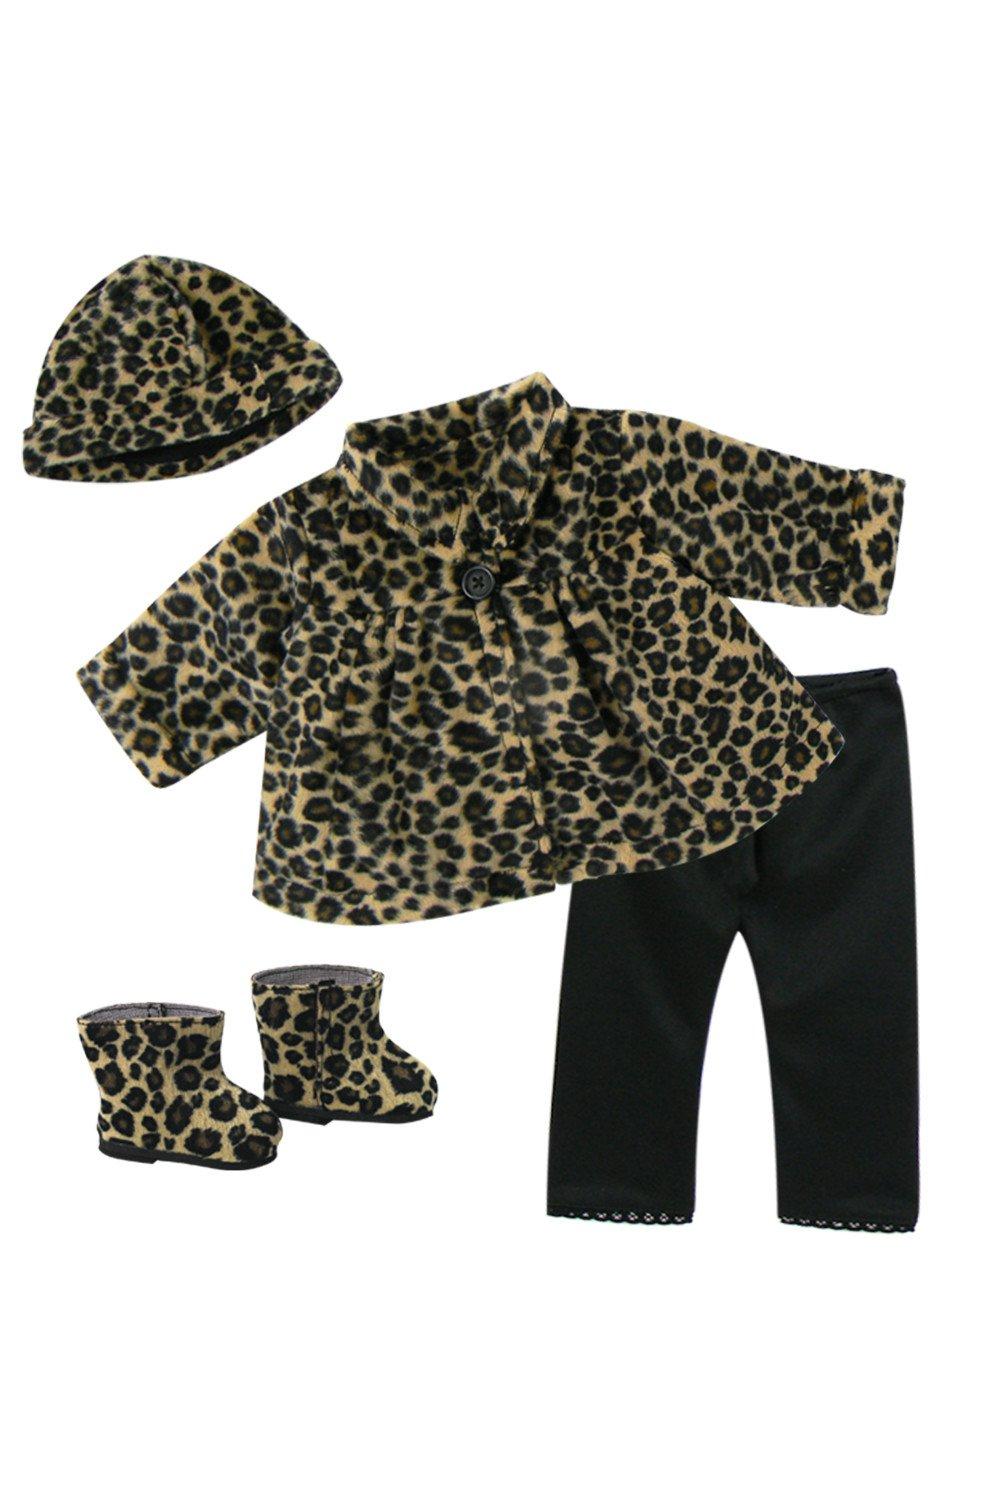 Sophia’s, 18" Dolls Clothes Animal Print Set Outfit with Doll Shoes & Hat